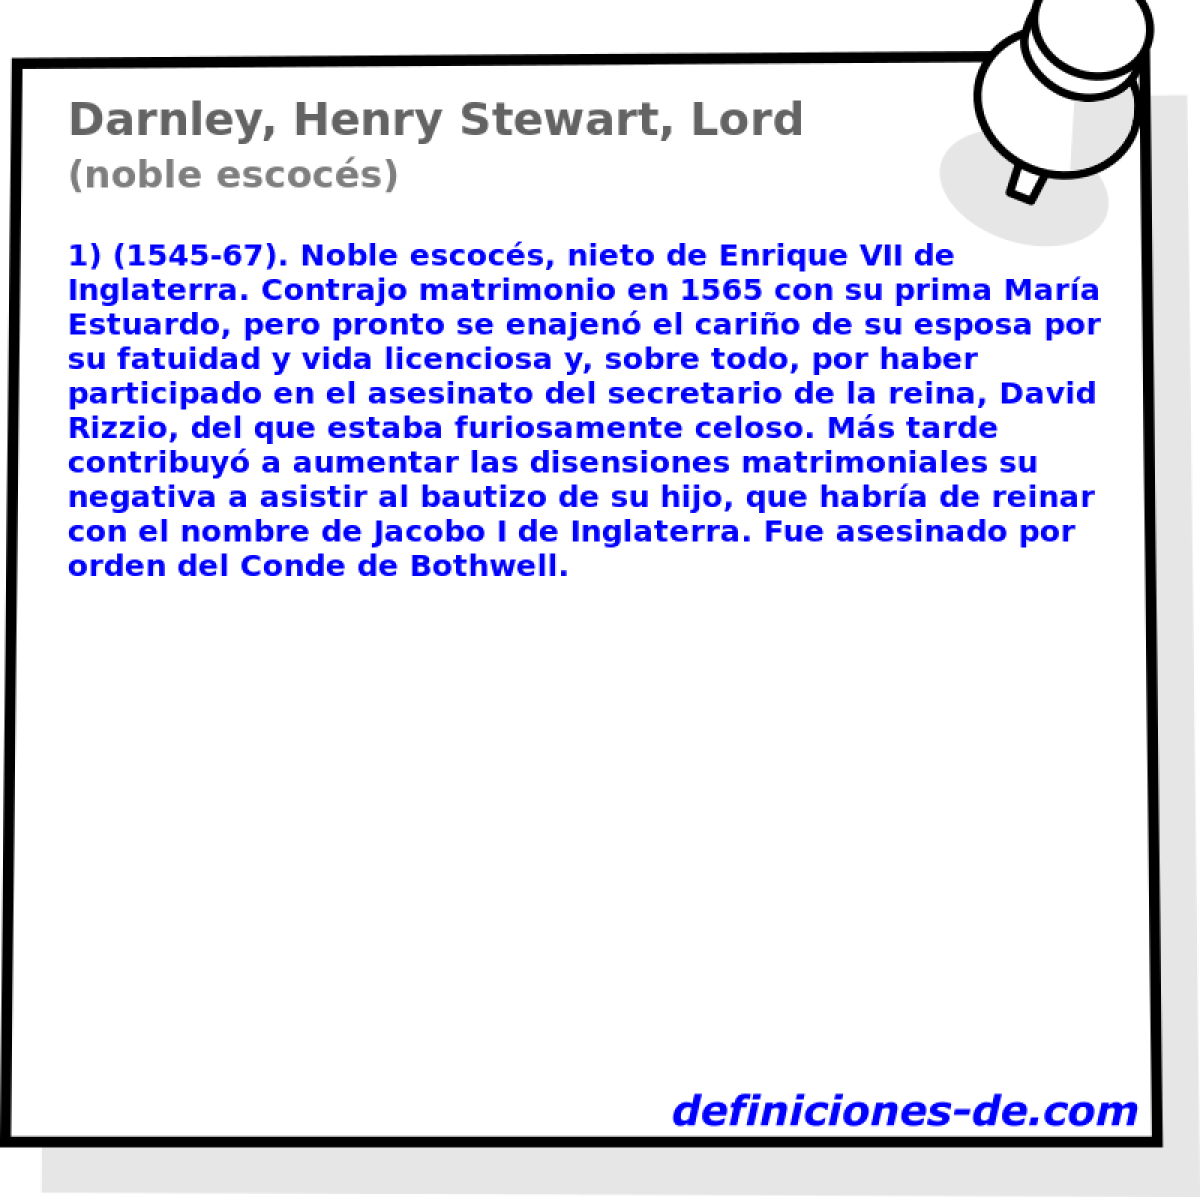 Darnley, Henry Stewart, Lord (noble escocs)